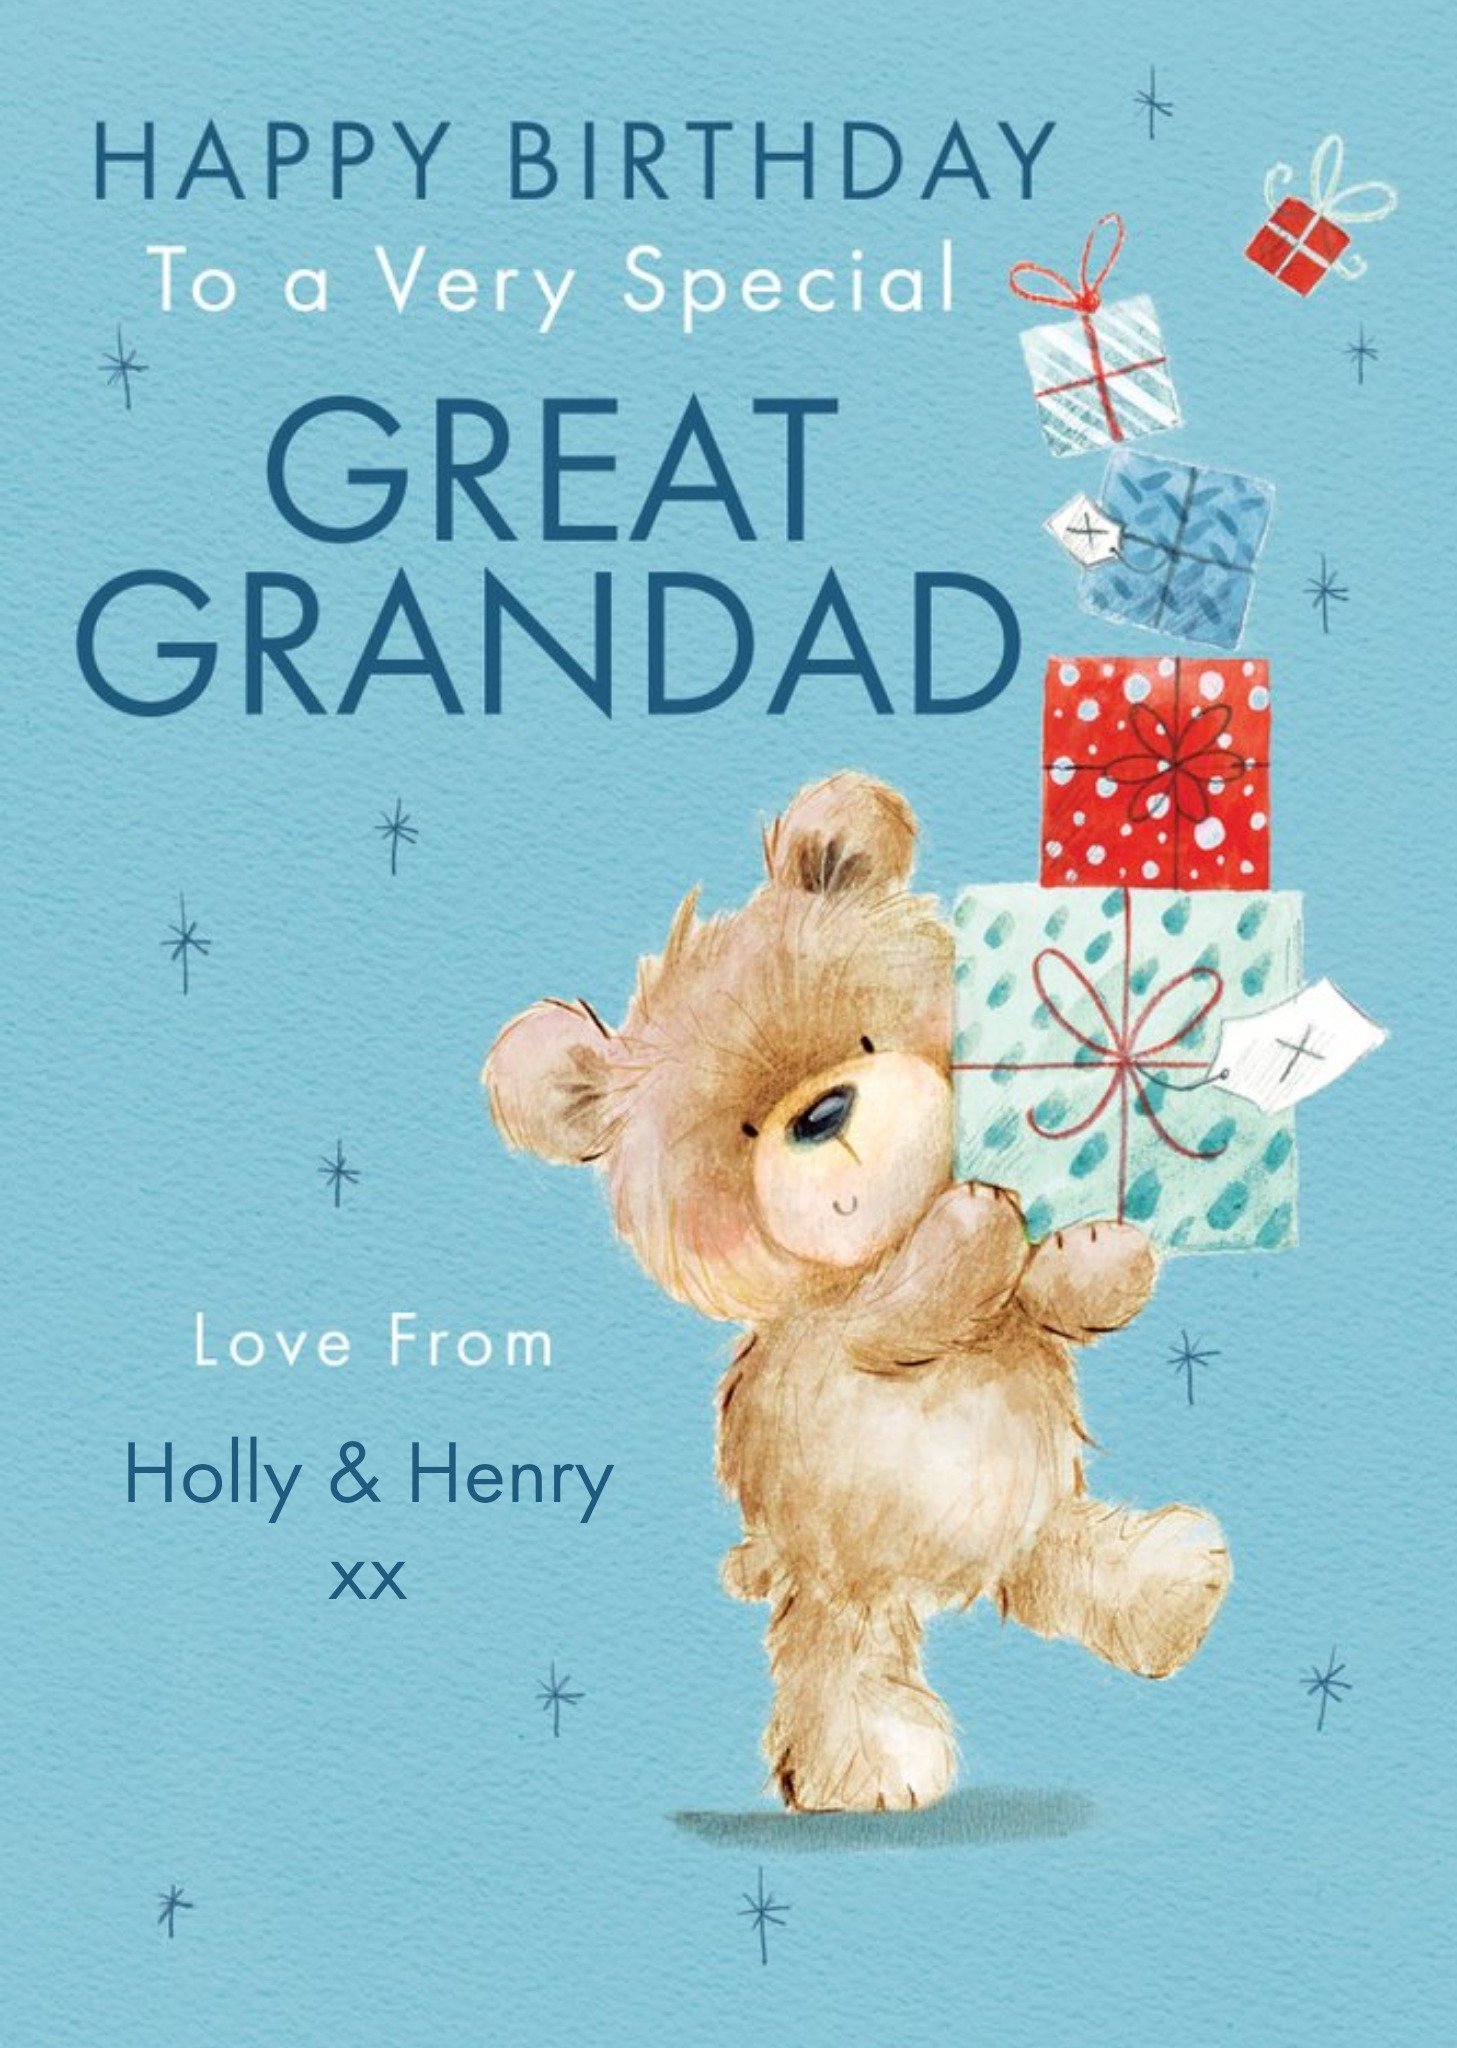 Moonpig Clintons Illustrated Teddy Bear Happy Birthday To A Very Special Great Gandad Card , Large